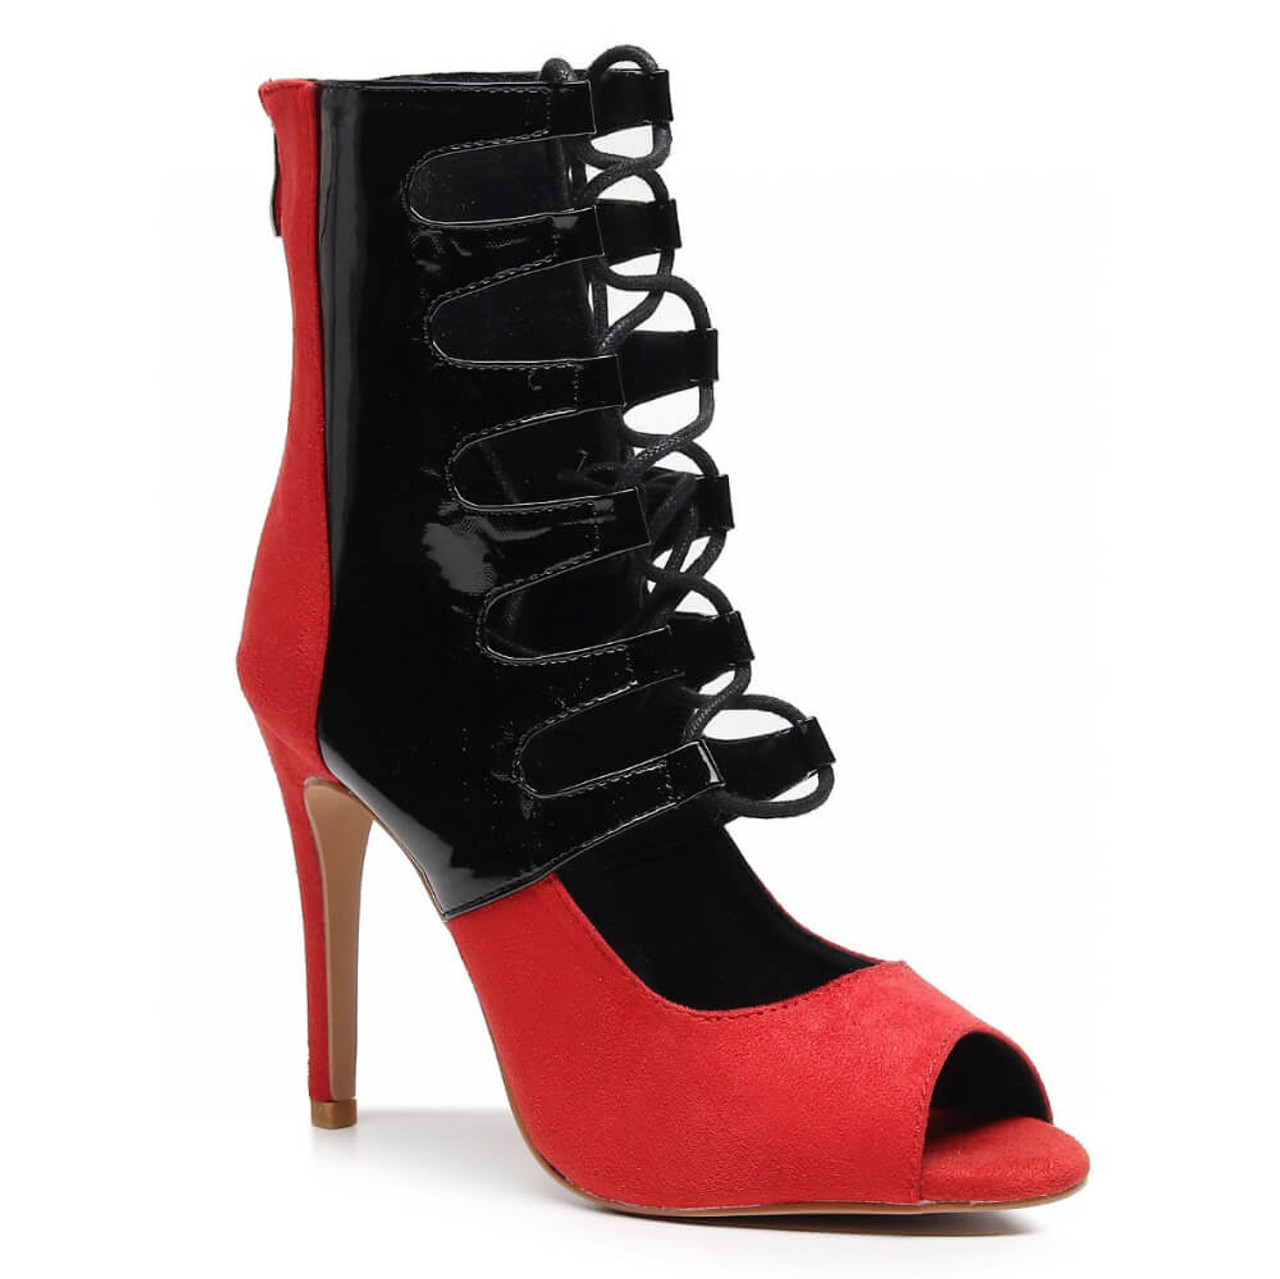 Ryann - Red and Black Lace Up Open Toe Strappy Heel - Burju Shoes